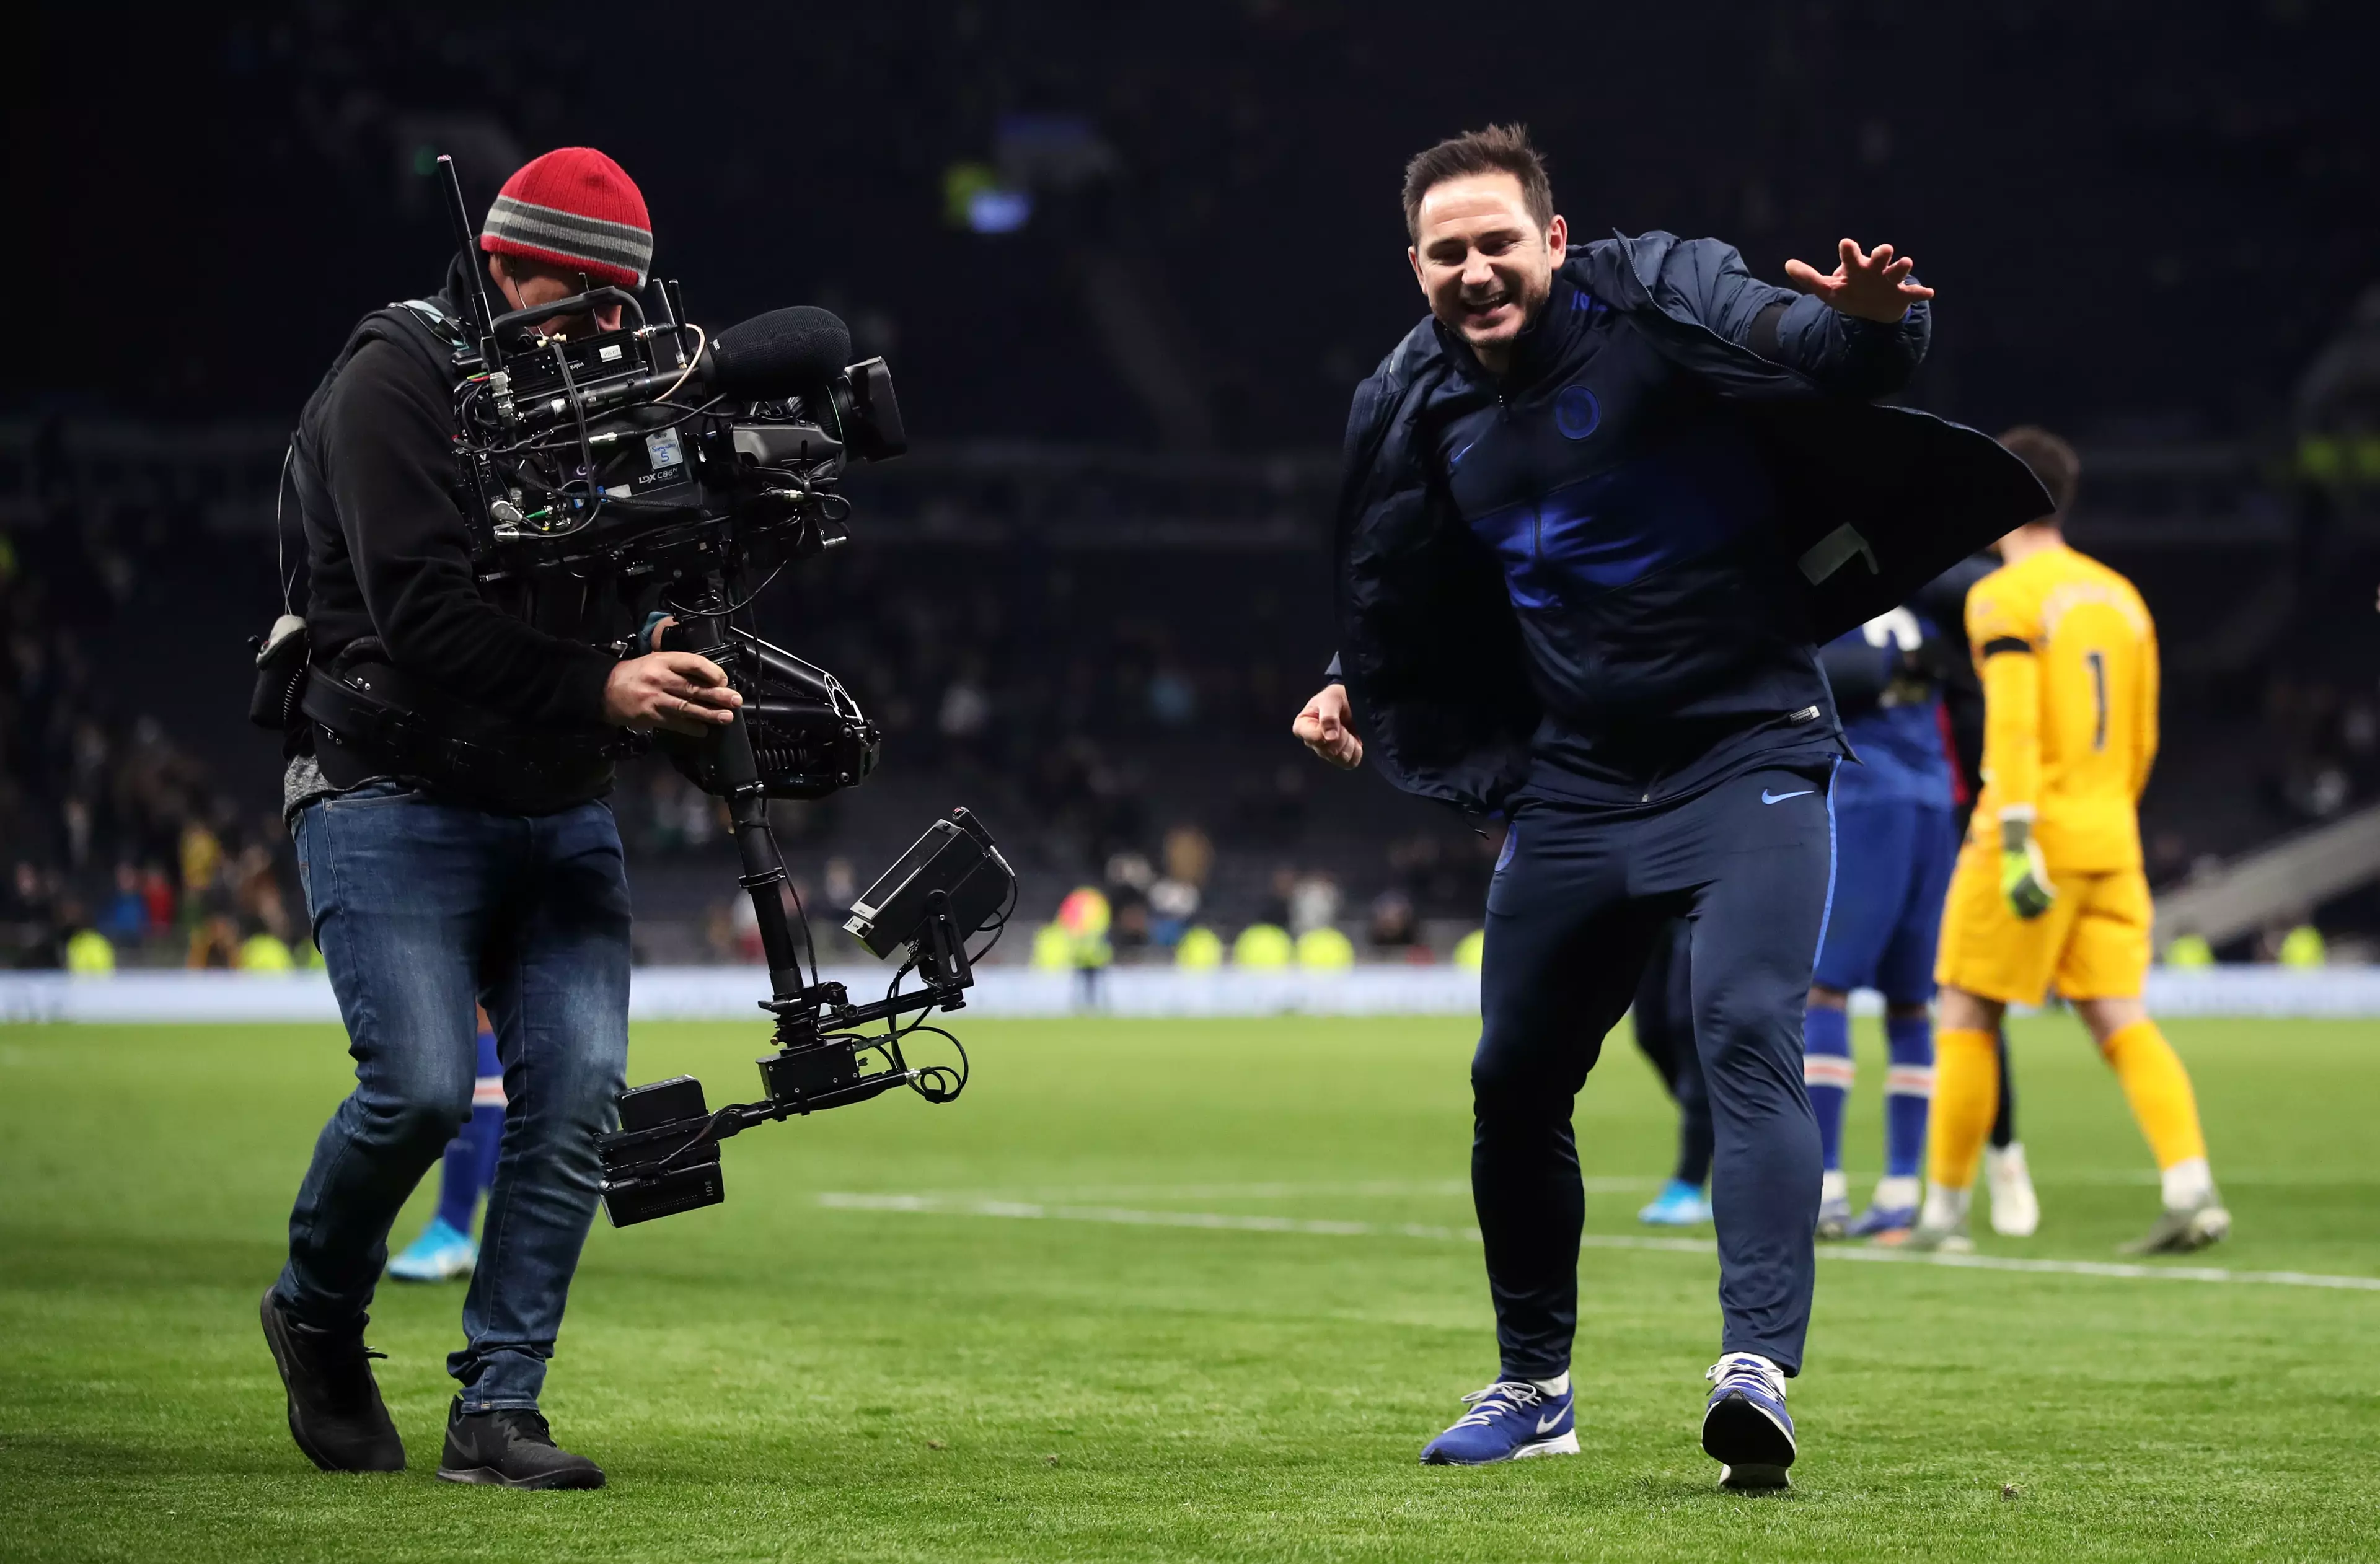 Lampard celebrates beating his former boss during the controversial match. Image: PA Images